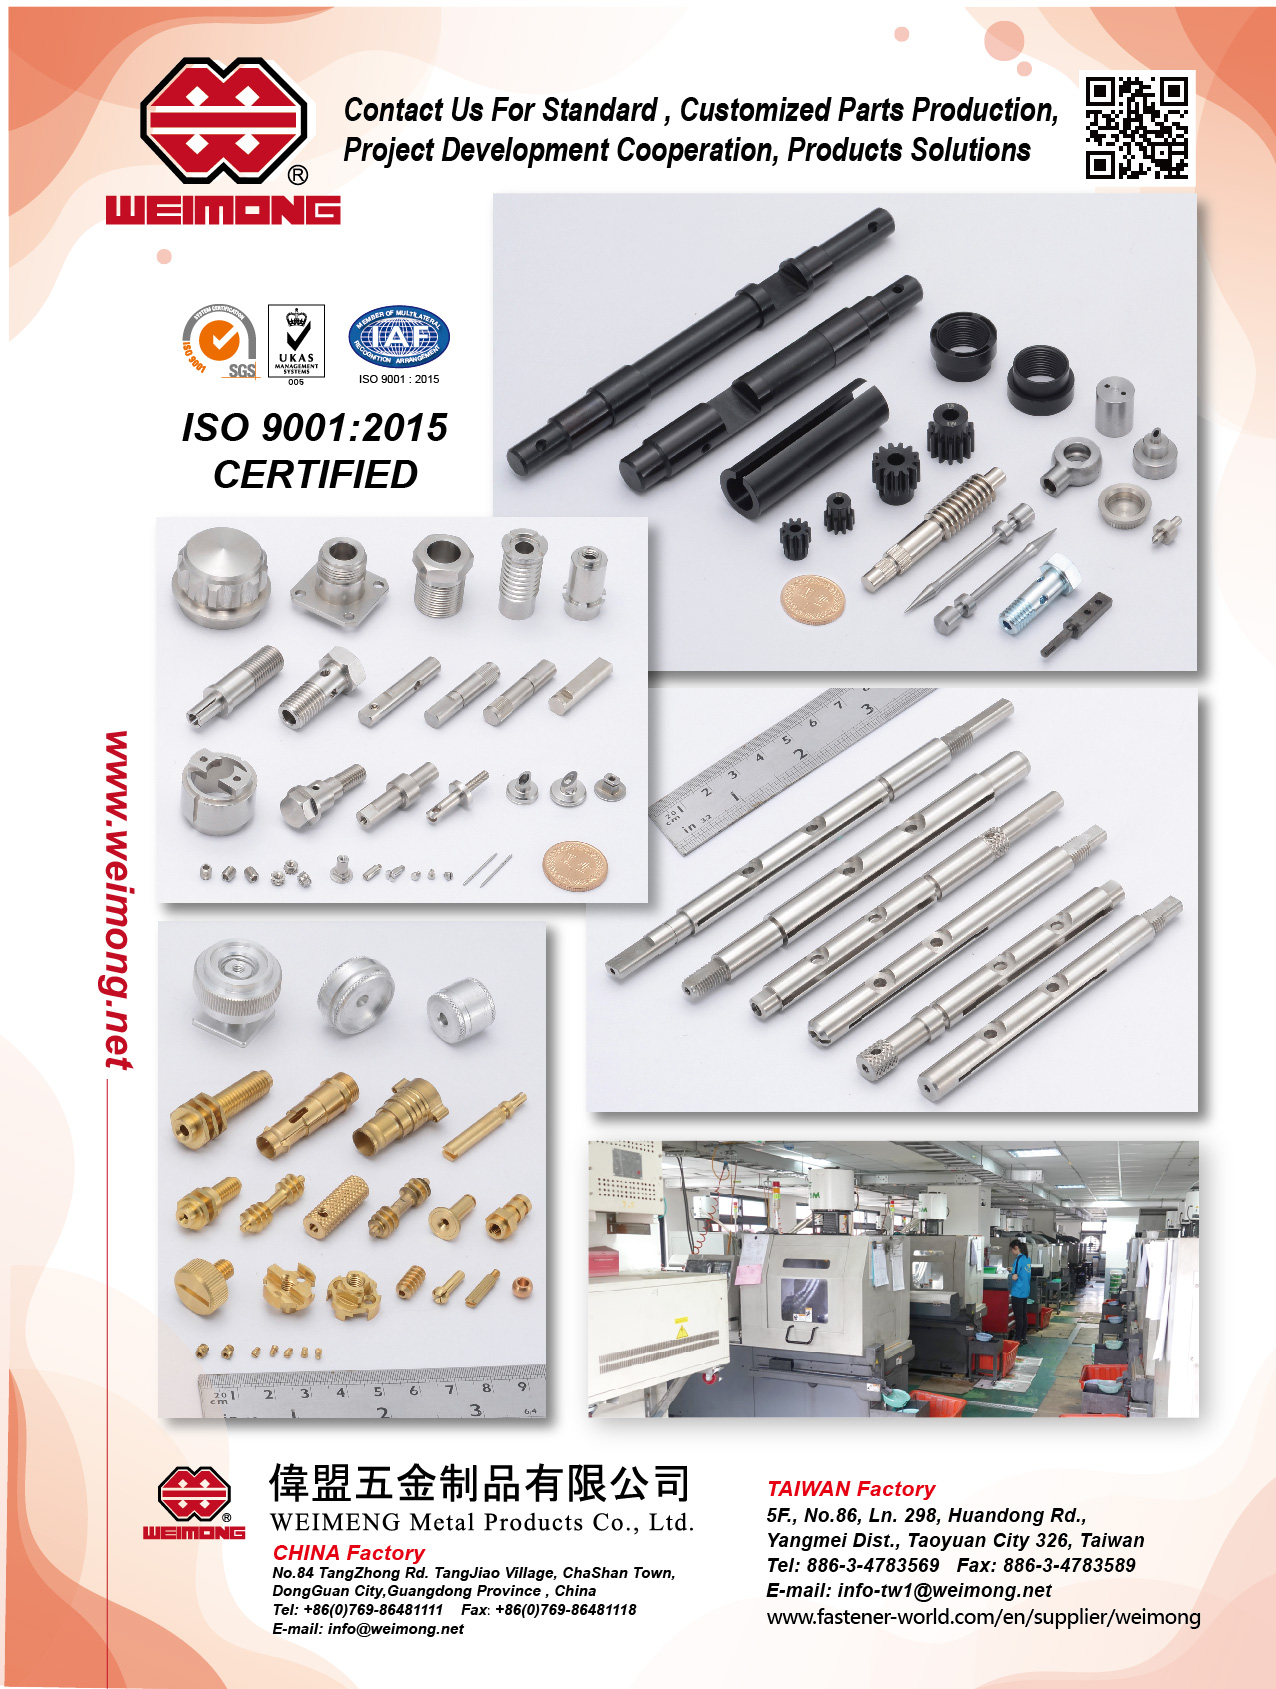 WEIMENG METAL PRODUCTS CO., LTD. , Machining Parts, Cold Forging, Stamping